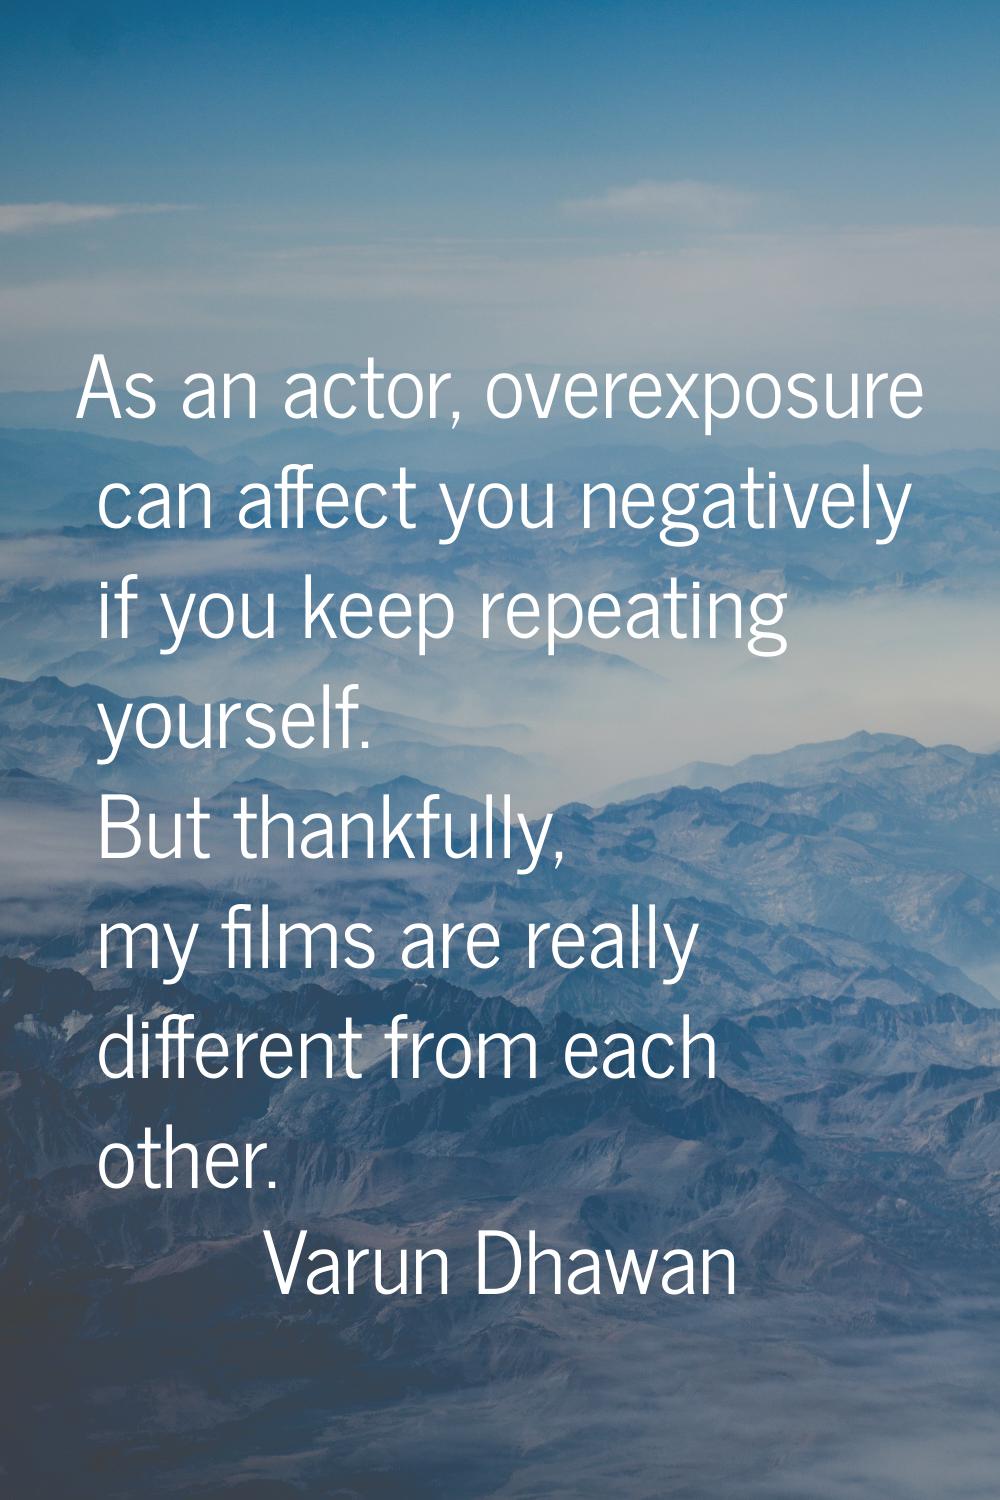 As an actor, overexposure can affect you negatively if you keep repeating yourself. But thankfully,